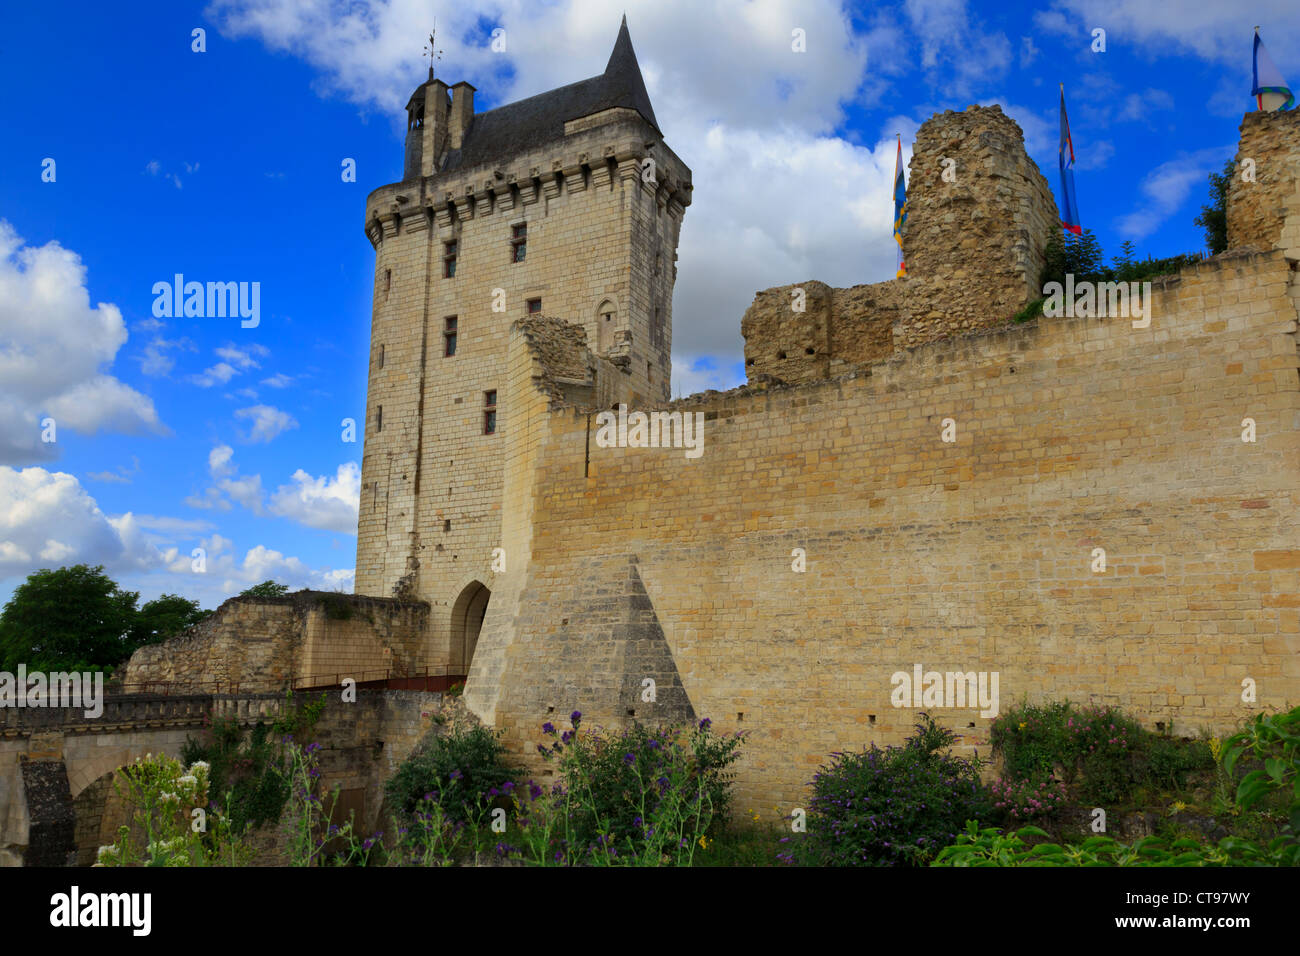 Tour de l'Horloge, Chateau Chinon, Loire Valley, France. The medieval clock tower is now the entrance to the castle. Stock Photo